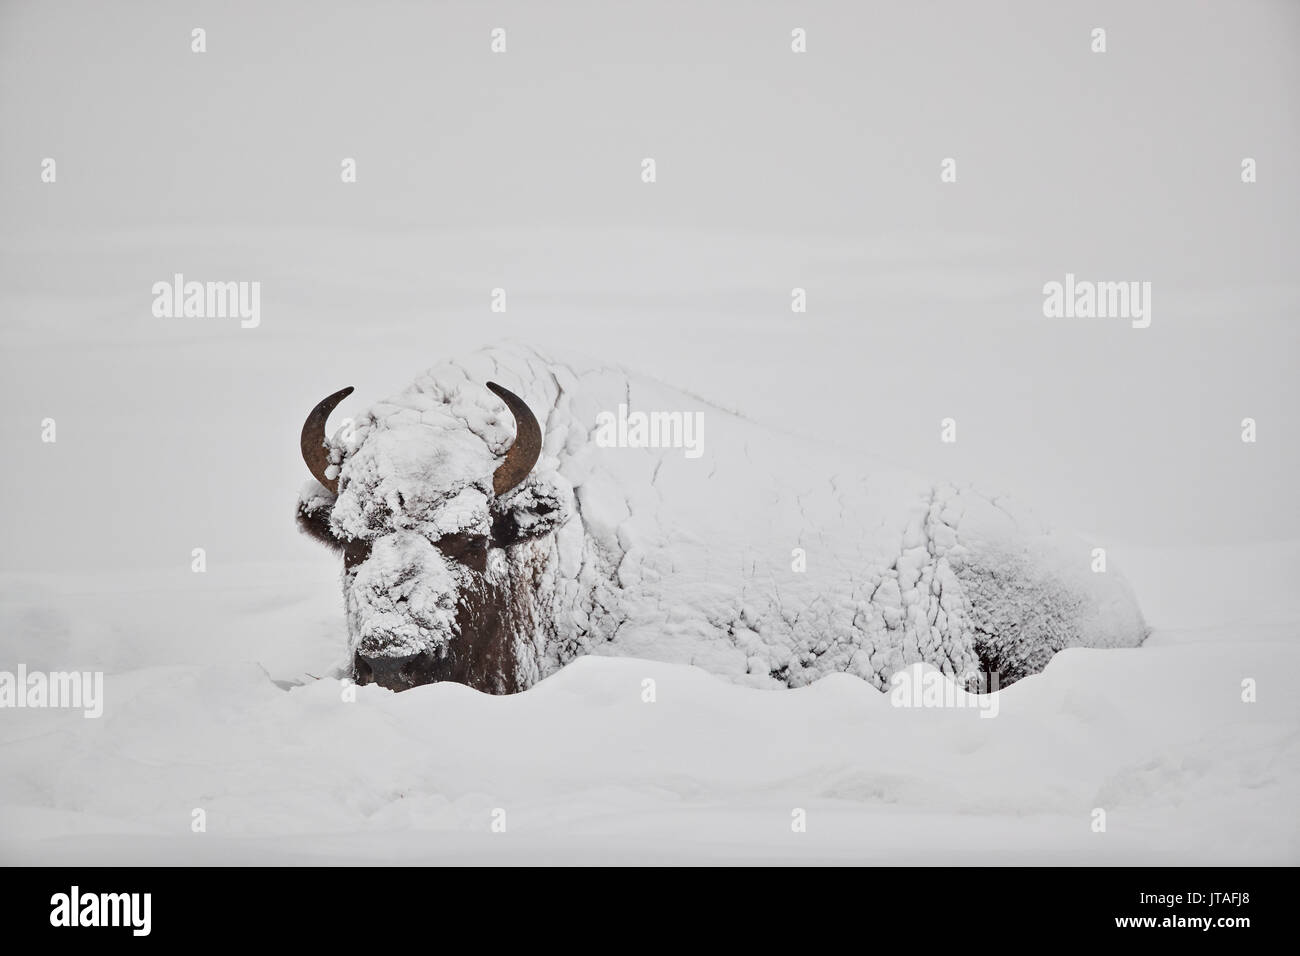 Bison (Bison bison) covered with snow in the winter, Yellowstone National Park, Wyoming, United States of America, North America Stock Photo